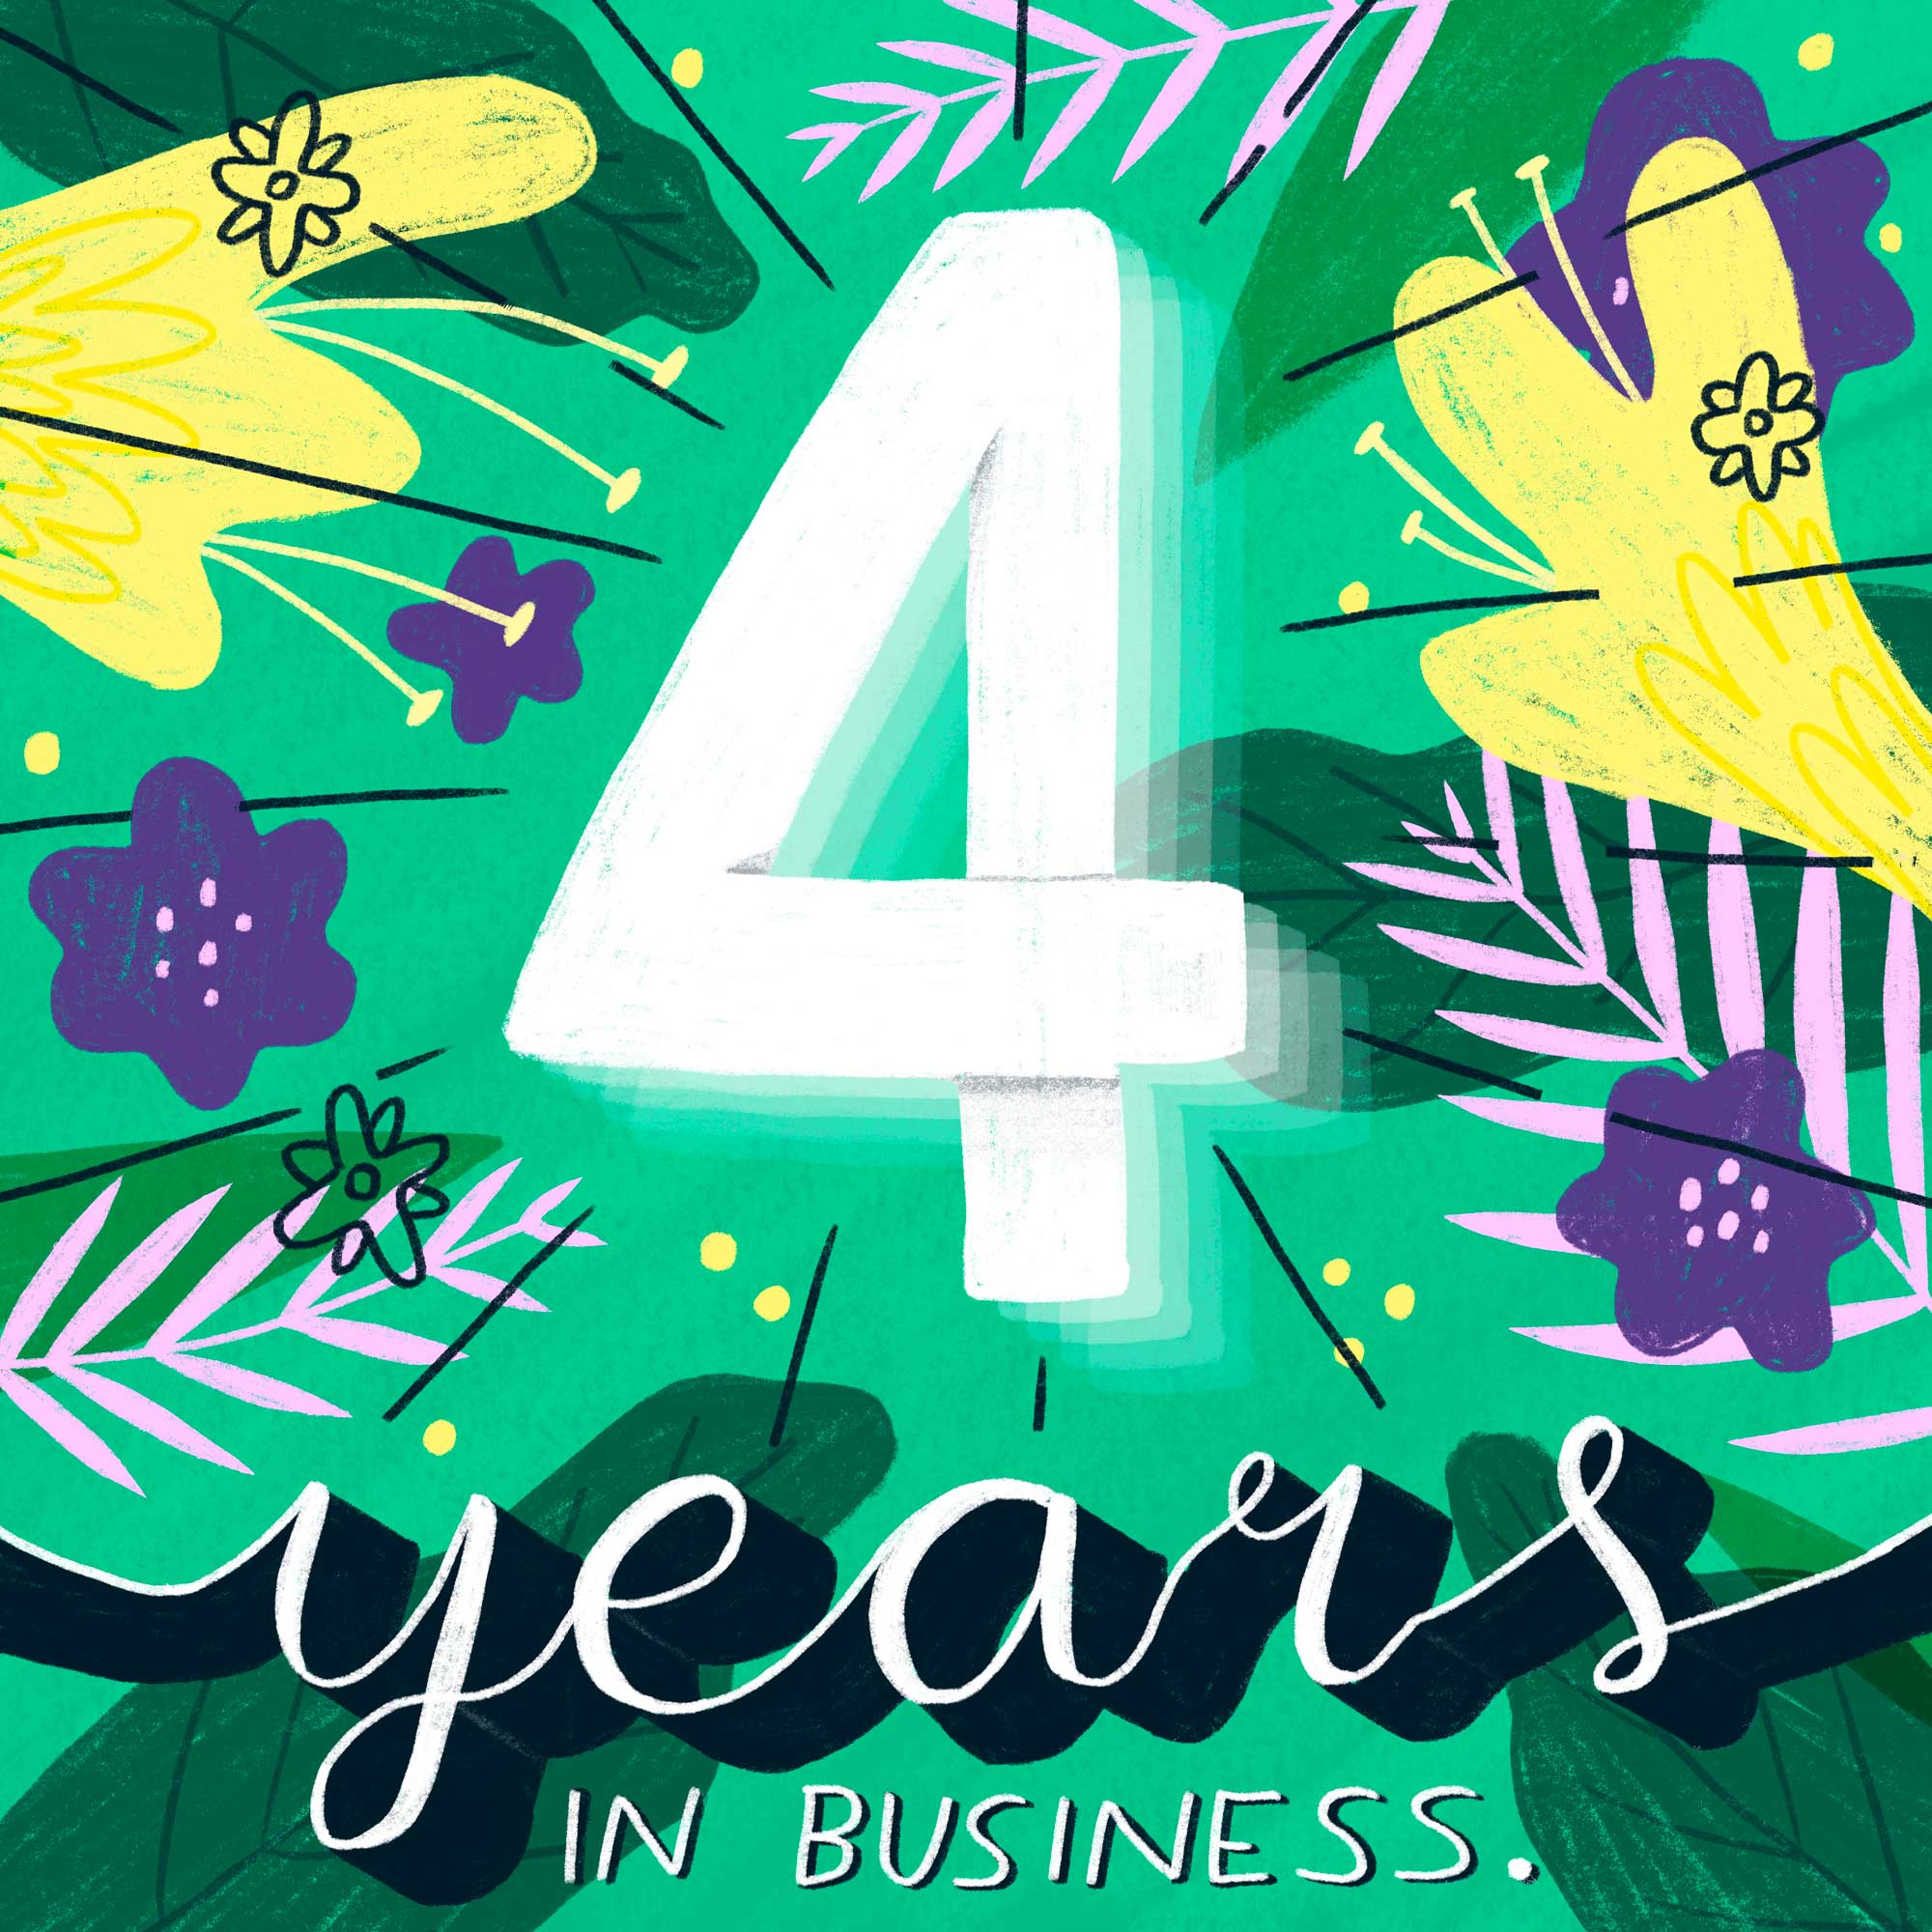 Elly Jahnz's four year business anniversary